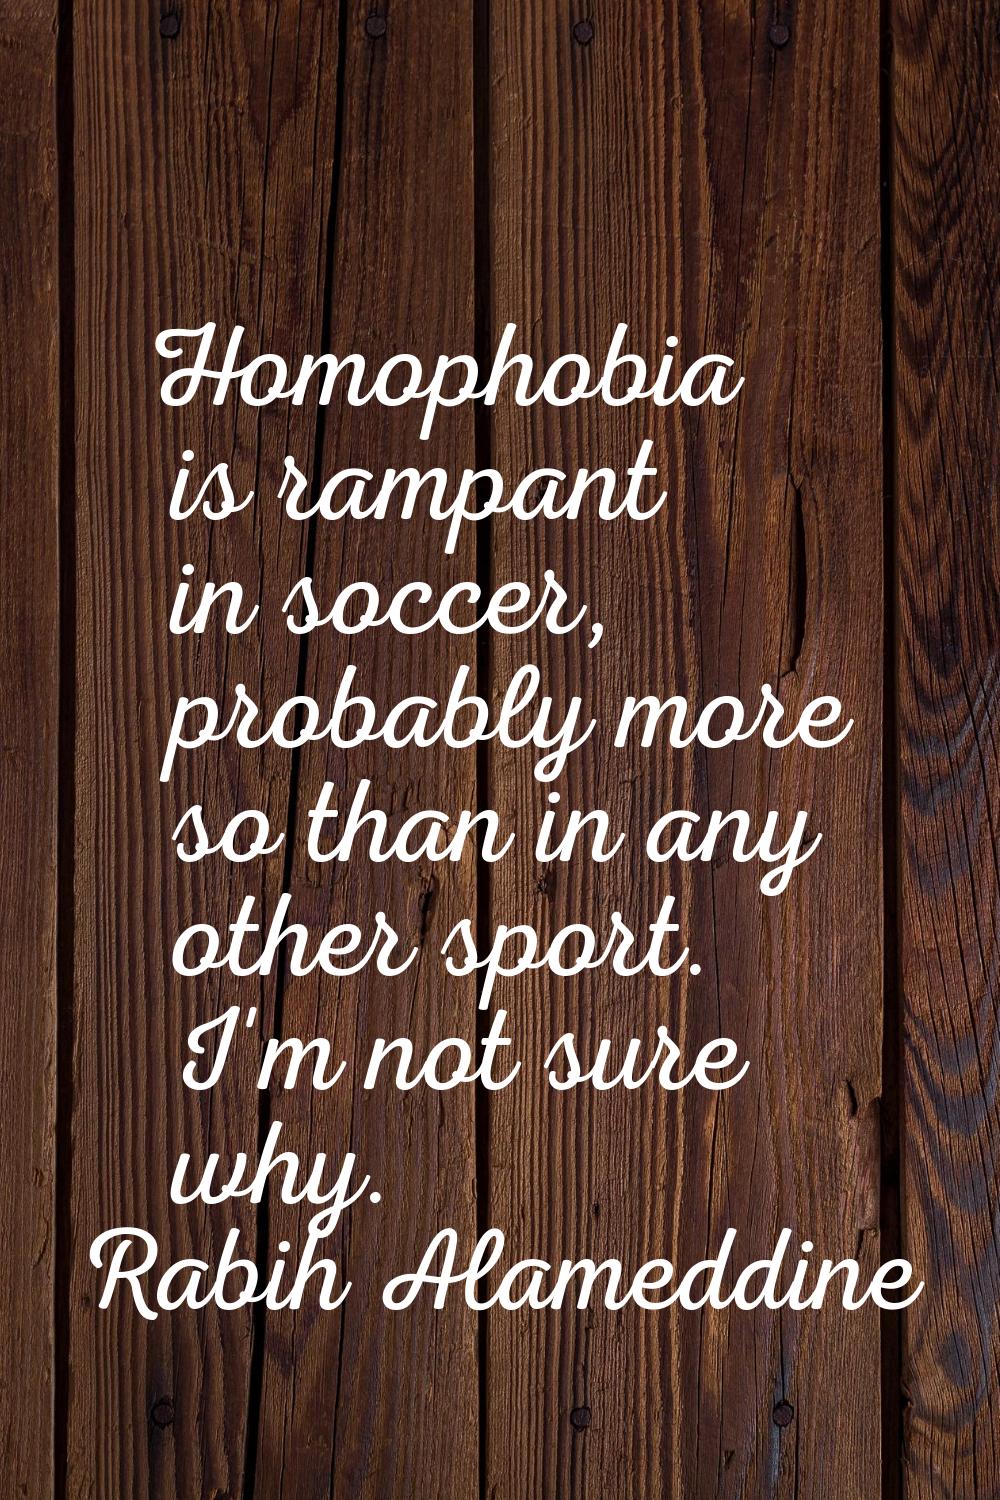 Homophobia is rampant in soccer, probably more so than in any other sport. I'm not sure why.